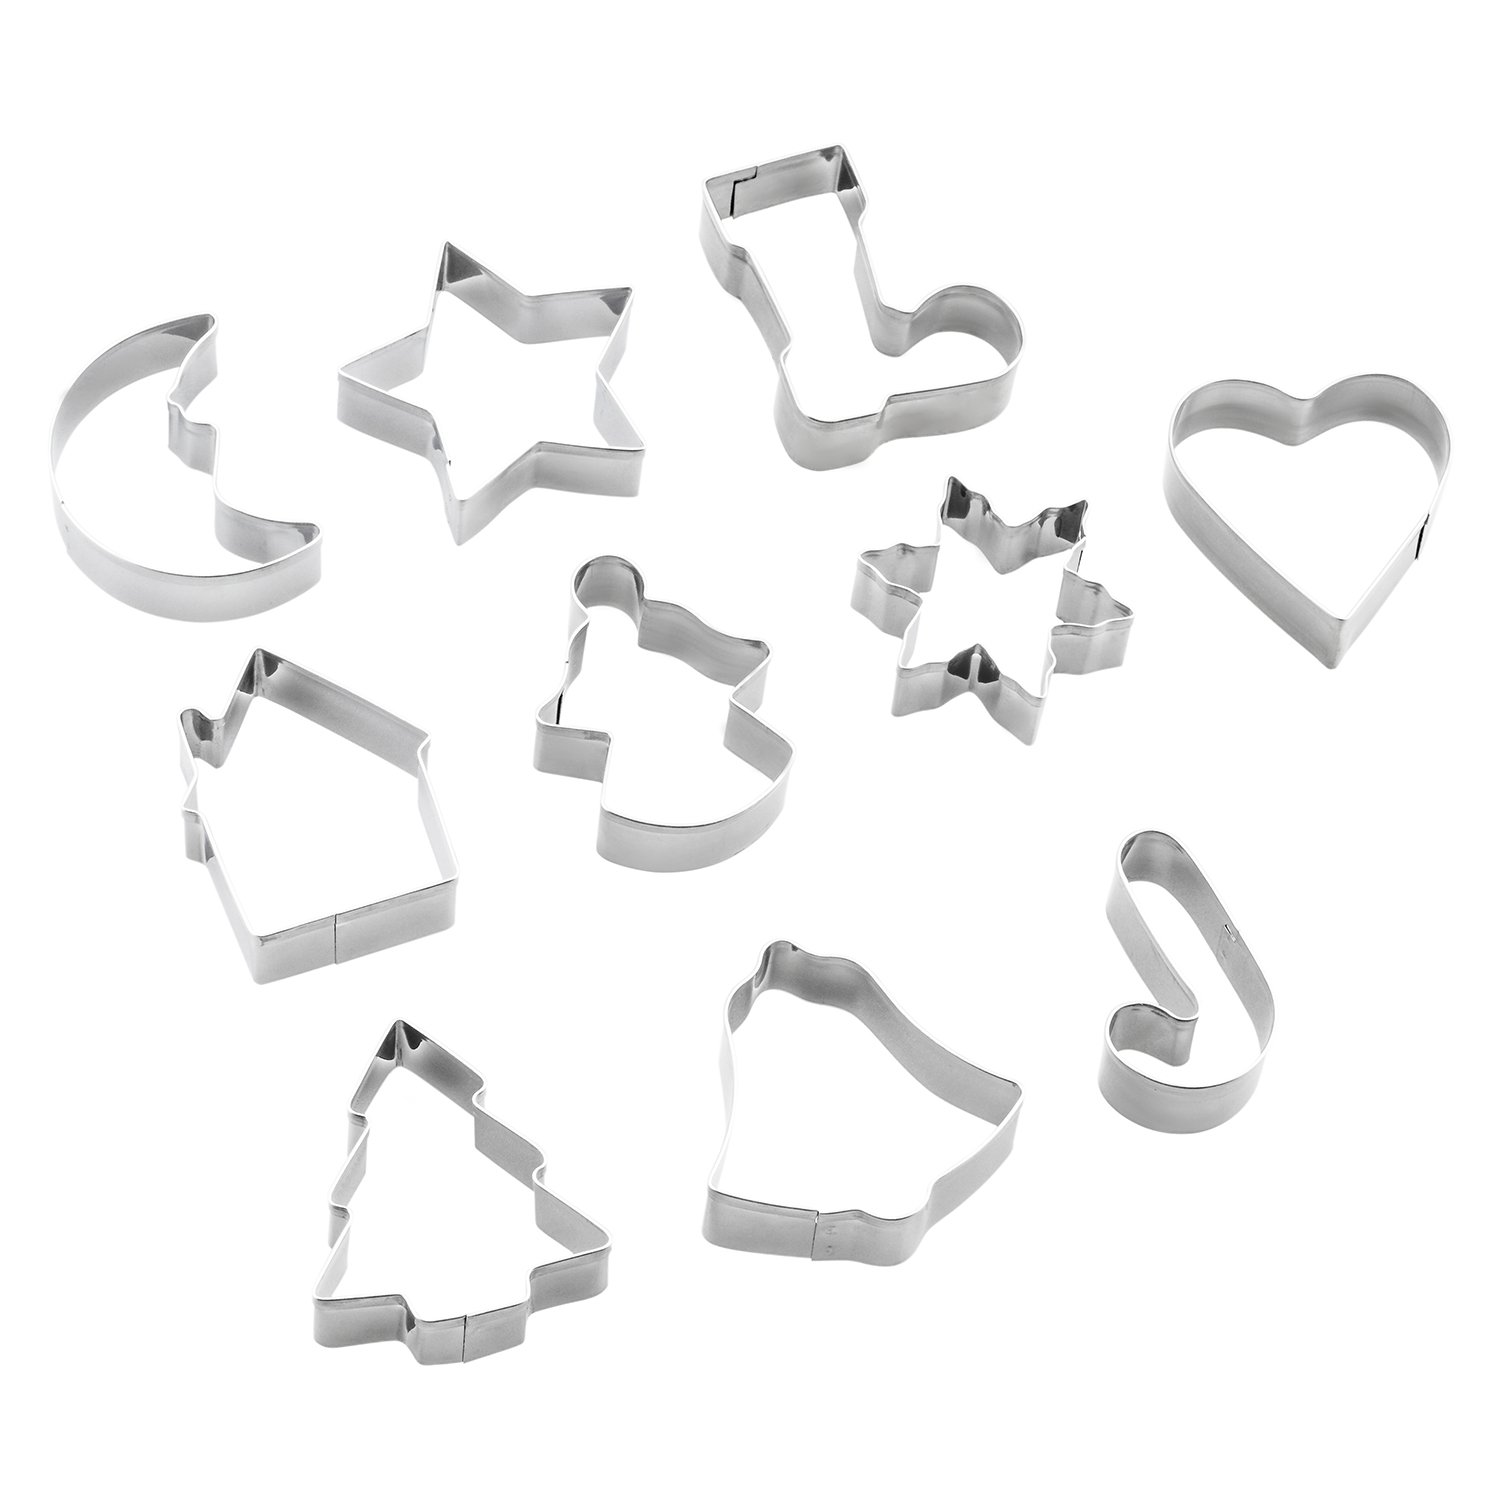 Christmas Cookie Cutters Set - Holiday Mini Cookie Cutter set of 10, Include: Gingerbread House, Snowflake, Christmas Tree, Gingerbread girl, Heart, Star, Moon, Christmas Crutch, Bell, Boot